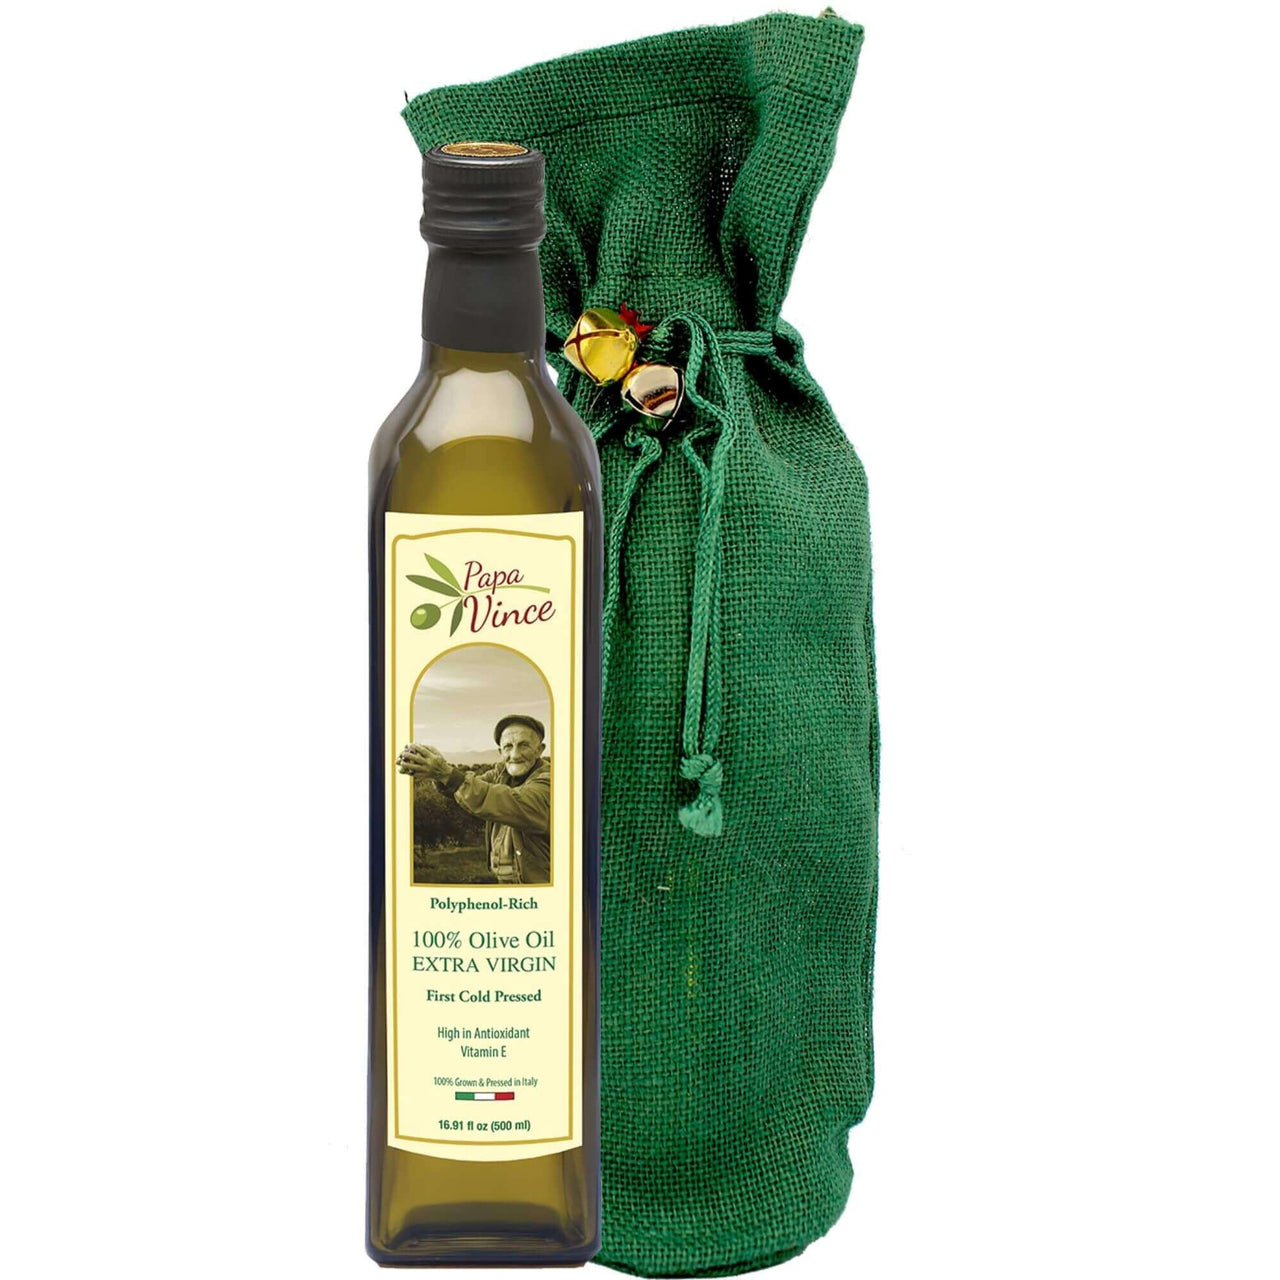 Papa Vince Olive Oil Extra Virgin Gift - Unblended, Family Harvest 2022/23, High in Polyphenols, Single Estate, First Cold Pressed, Sicily, Italy, Peppery Finish, Unfiltered, Unrefined, Green Bag - Papa Vince